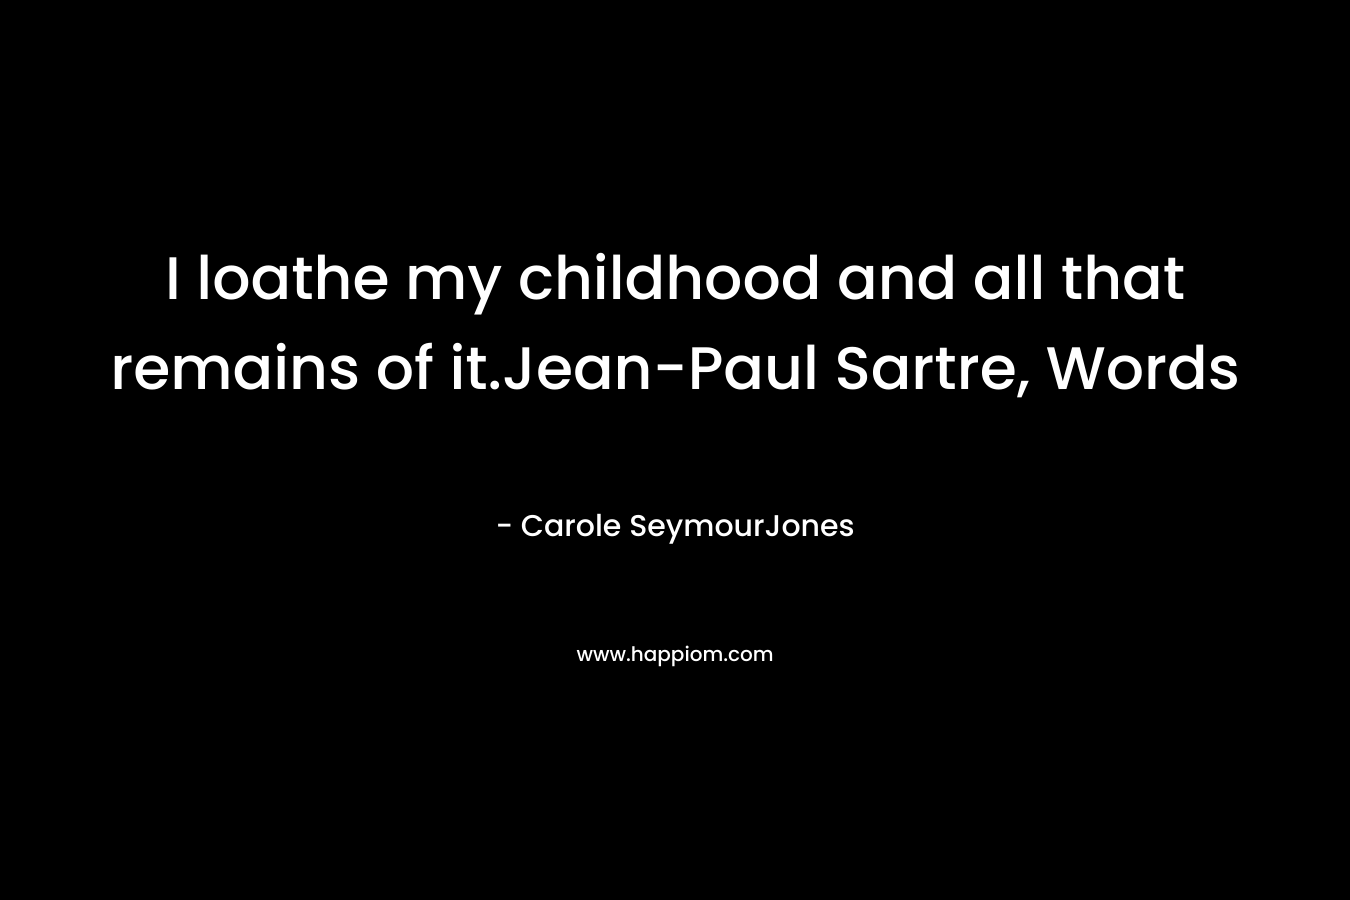 I loathe my childhood and all that remains of it.Jean-Paul Sartre, Words